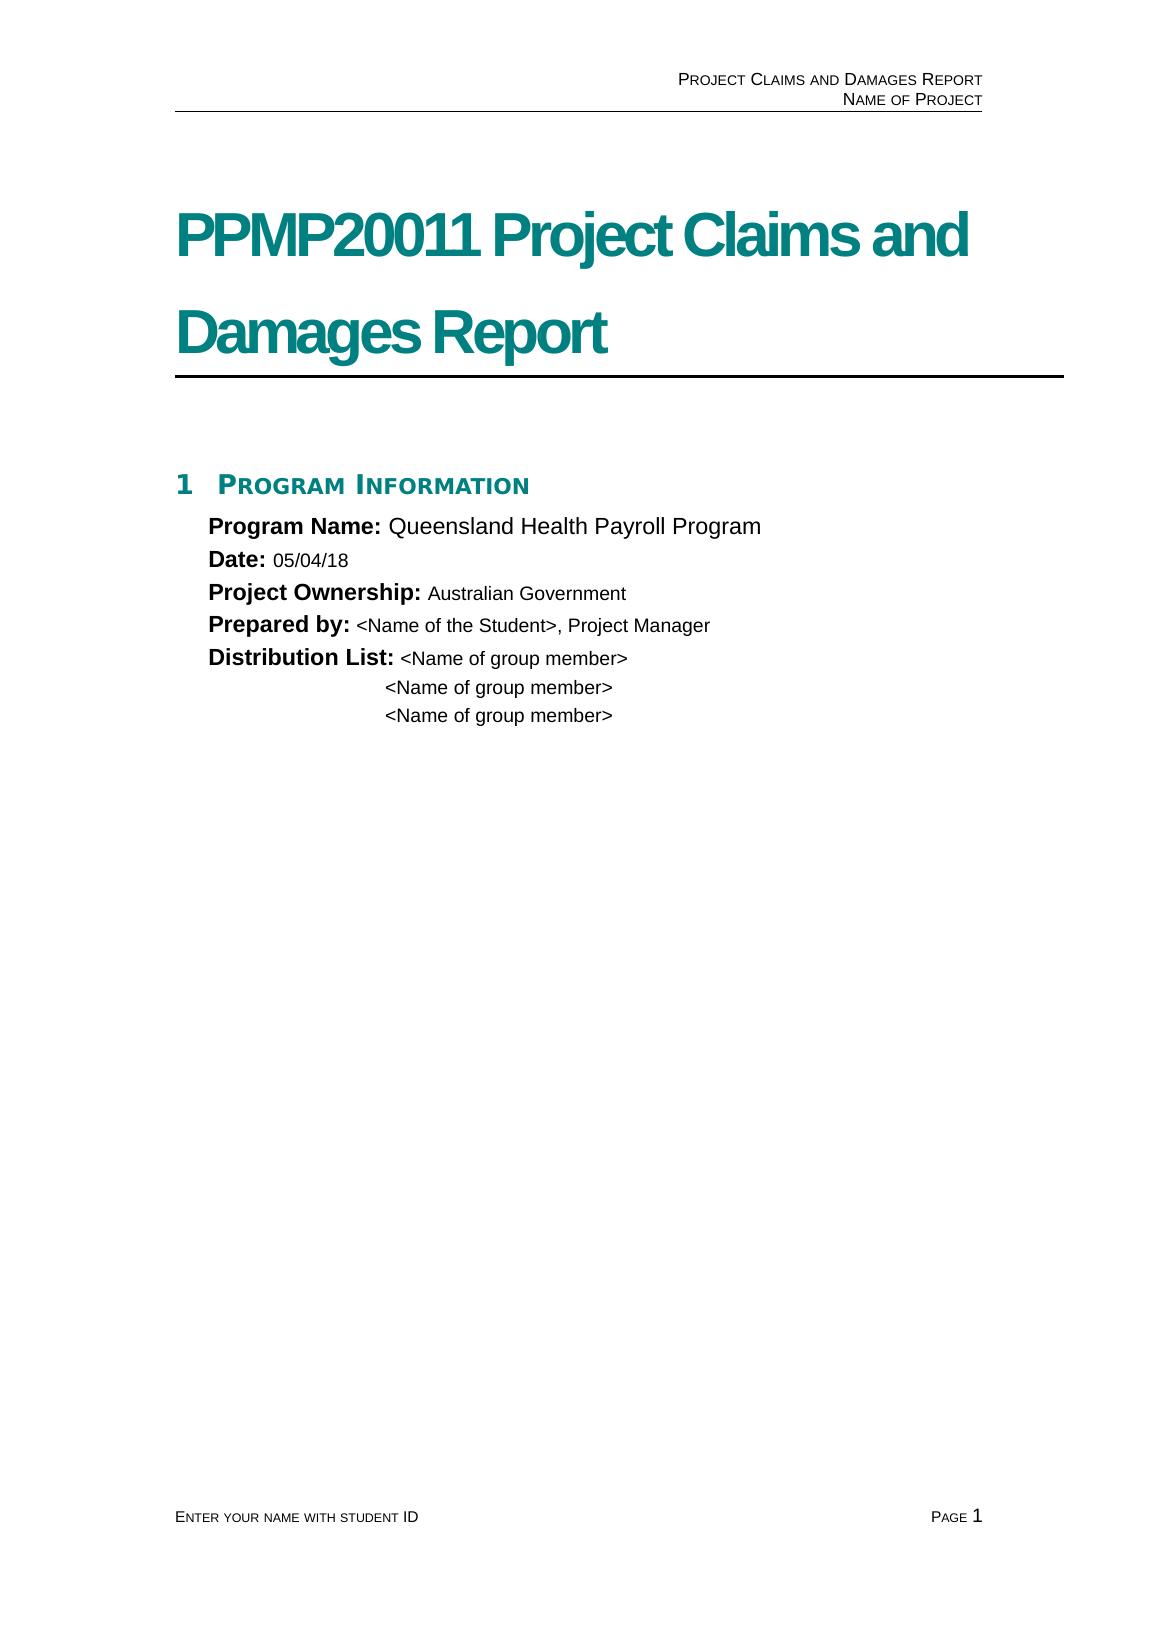 PPMP20011 - Project Claims and Damages Report_1